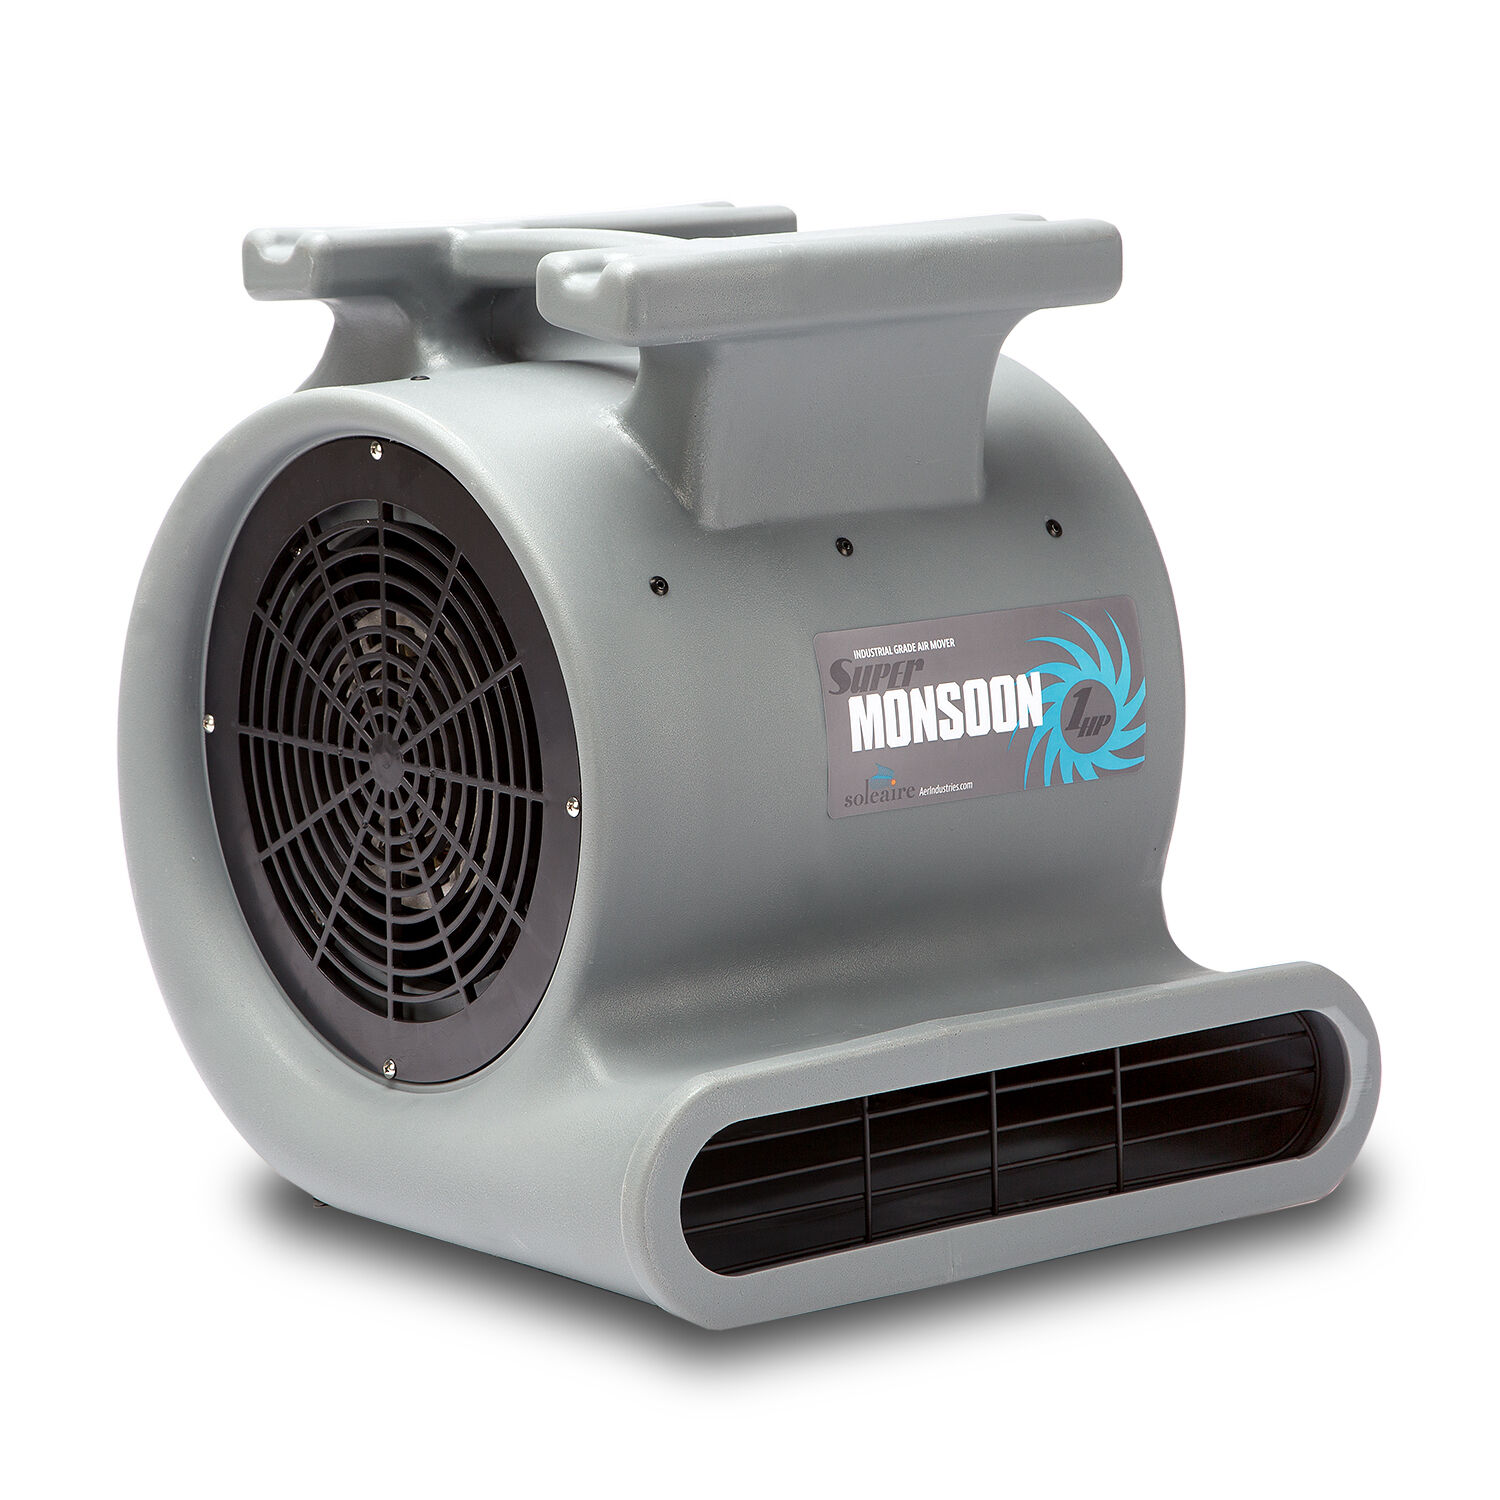 Soleaire Super Monsoon 1hp Air Mover Carpet Dryer Floor Blower Fan Janitorial